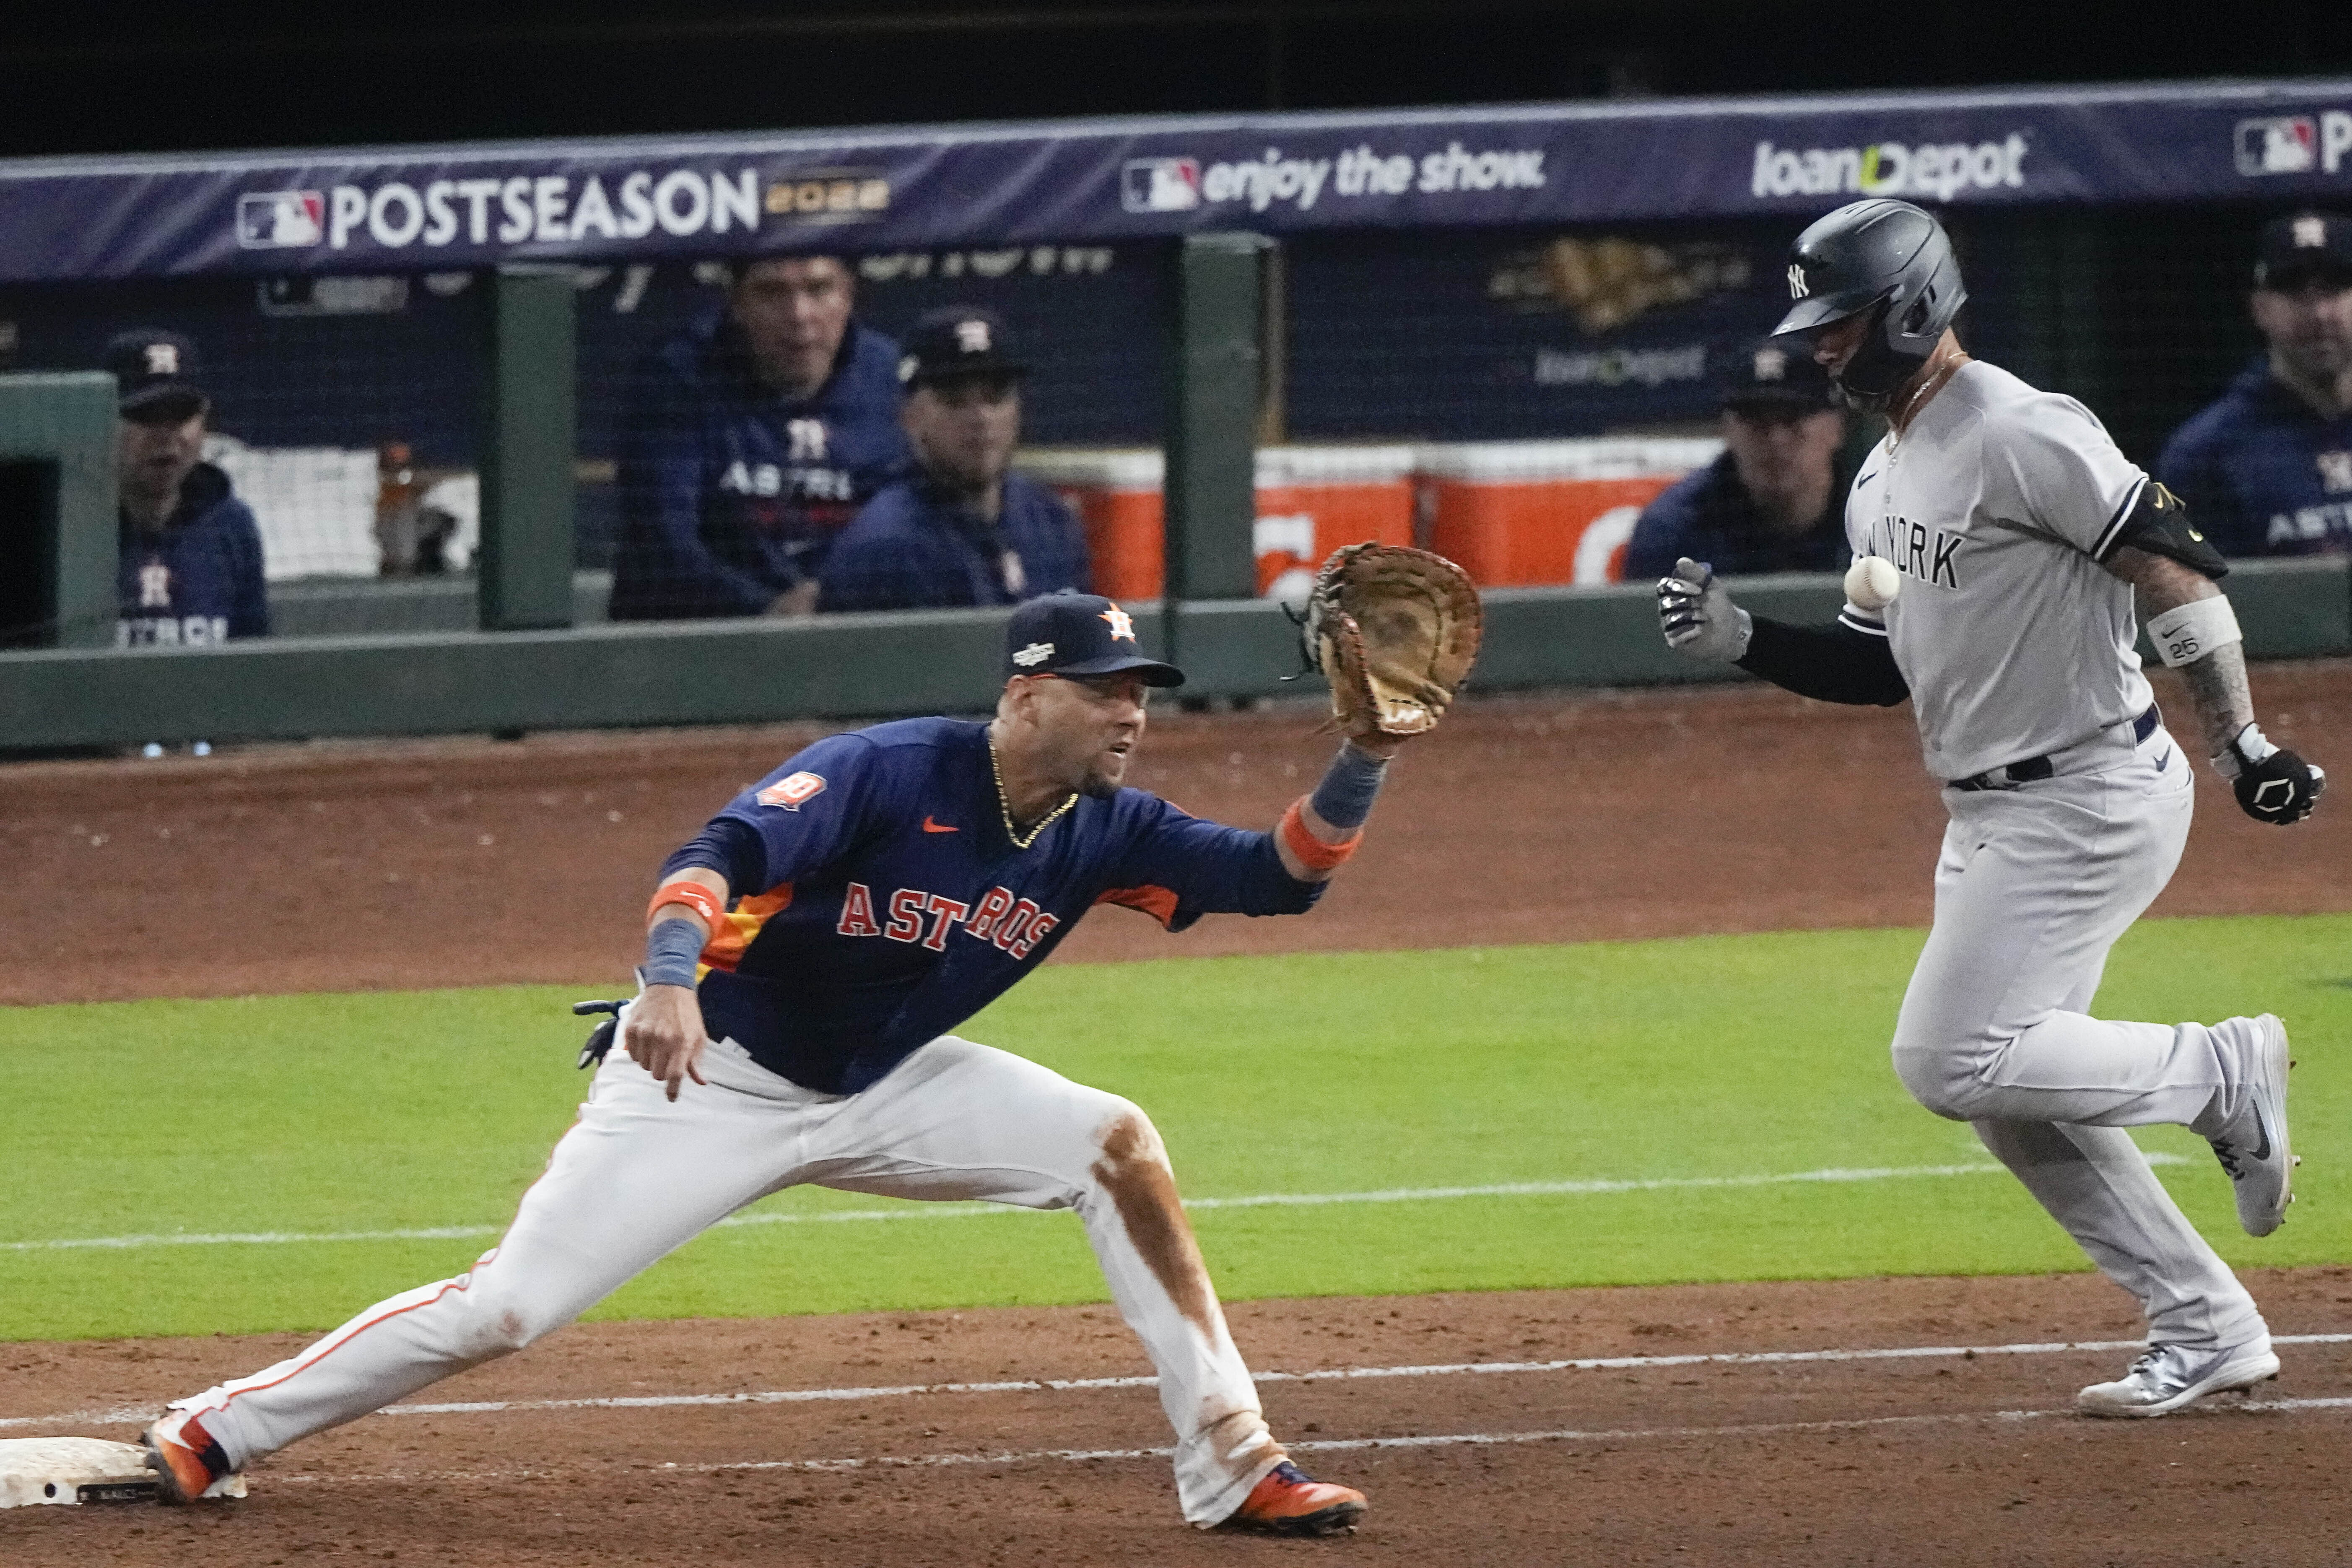 MLB Odds for Astros vs. Yankees: Betting Prediction for Saturday